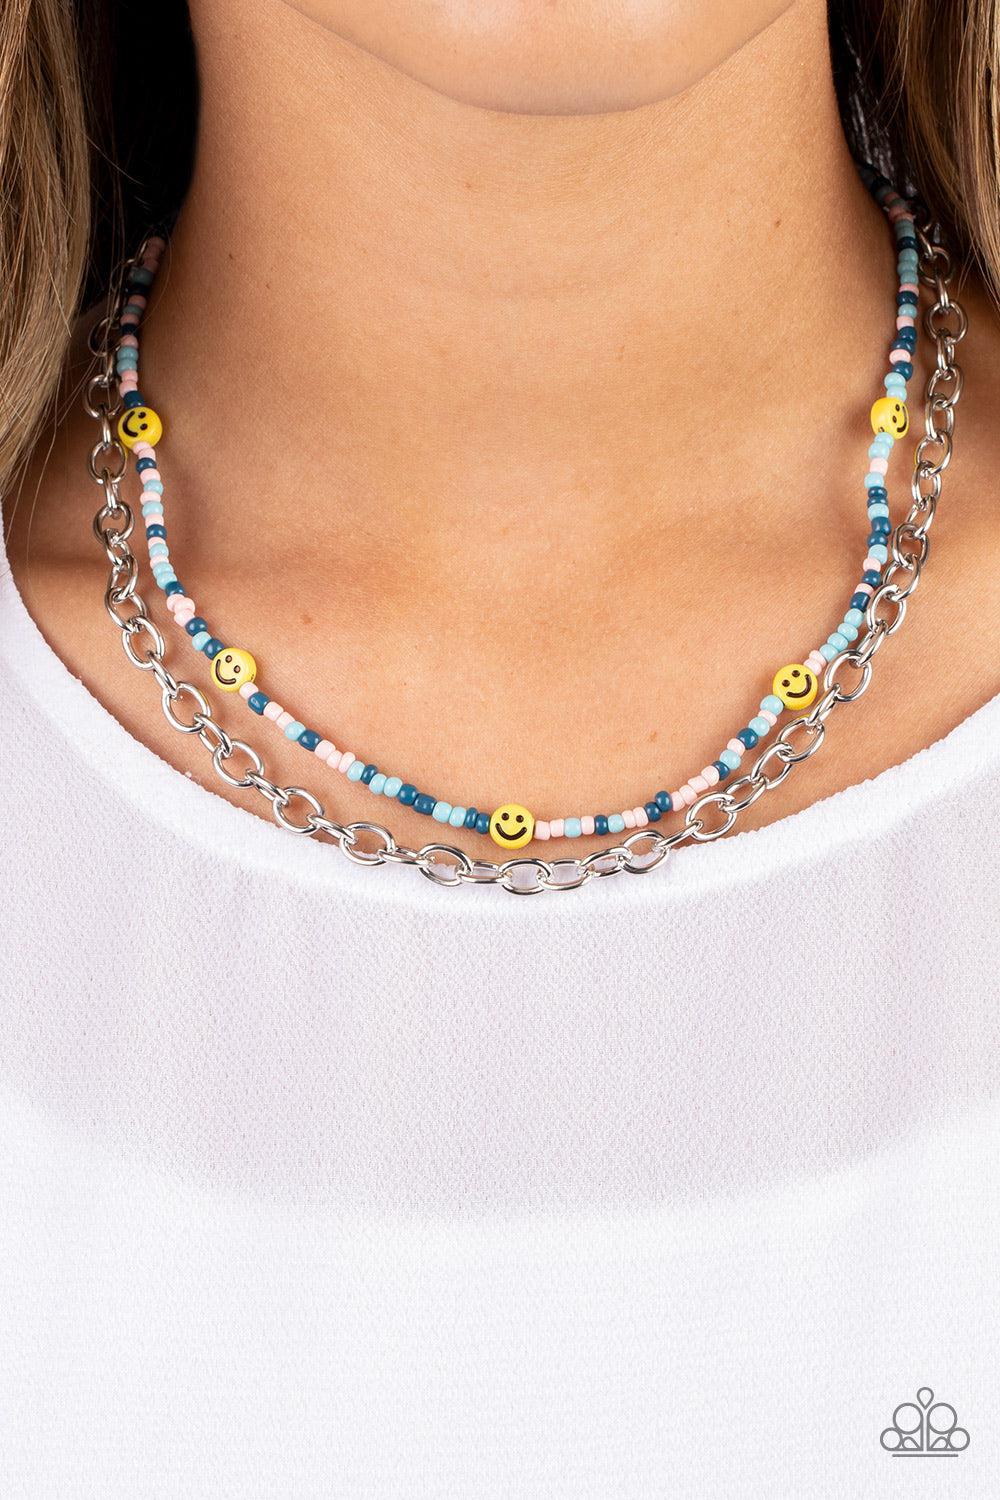 Happy Looks Good on You Blue Necklace - Paparazzi Accessories- lightbox - CarasShop.com - $5 Jewelry by Cara Jewels